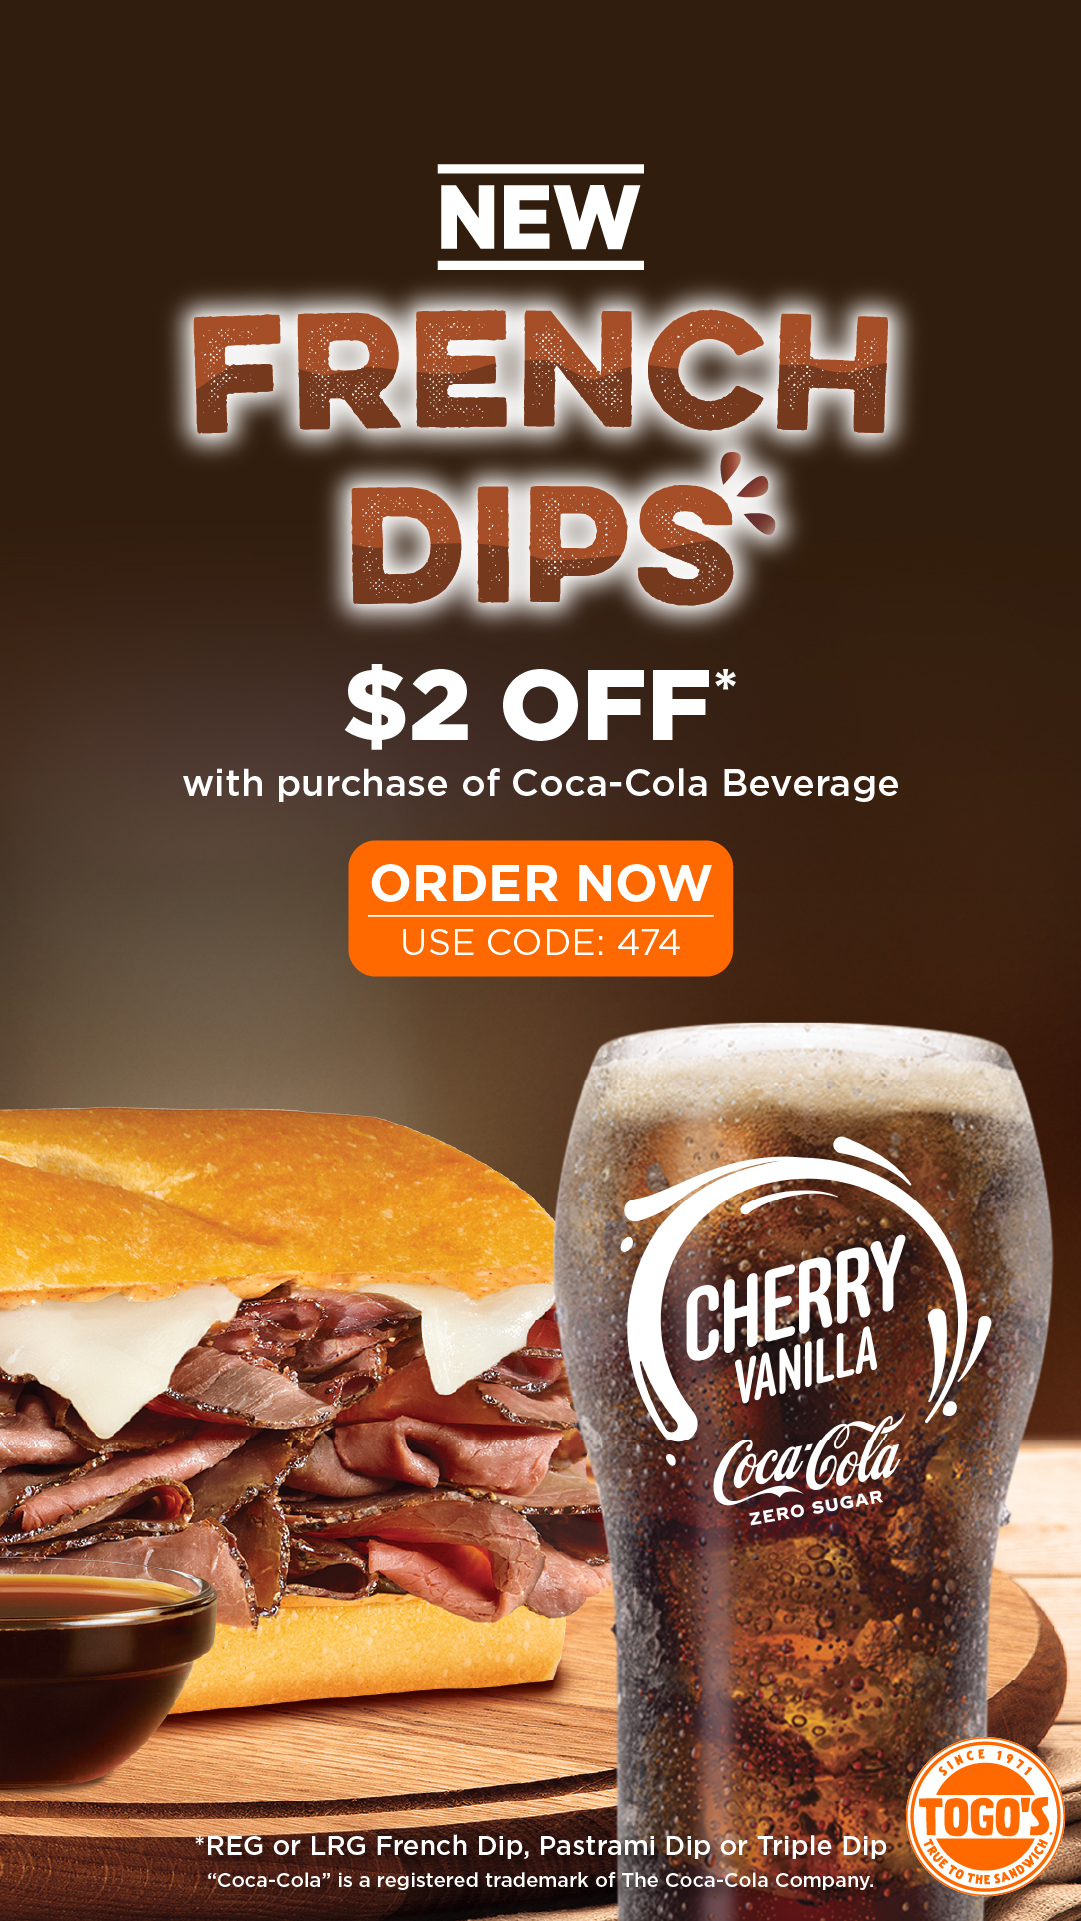 $2 OFF when you choose French Dip!